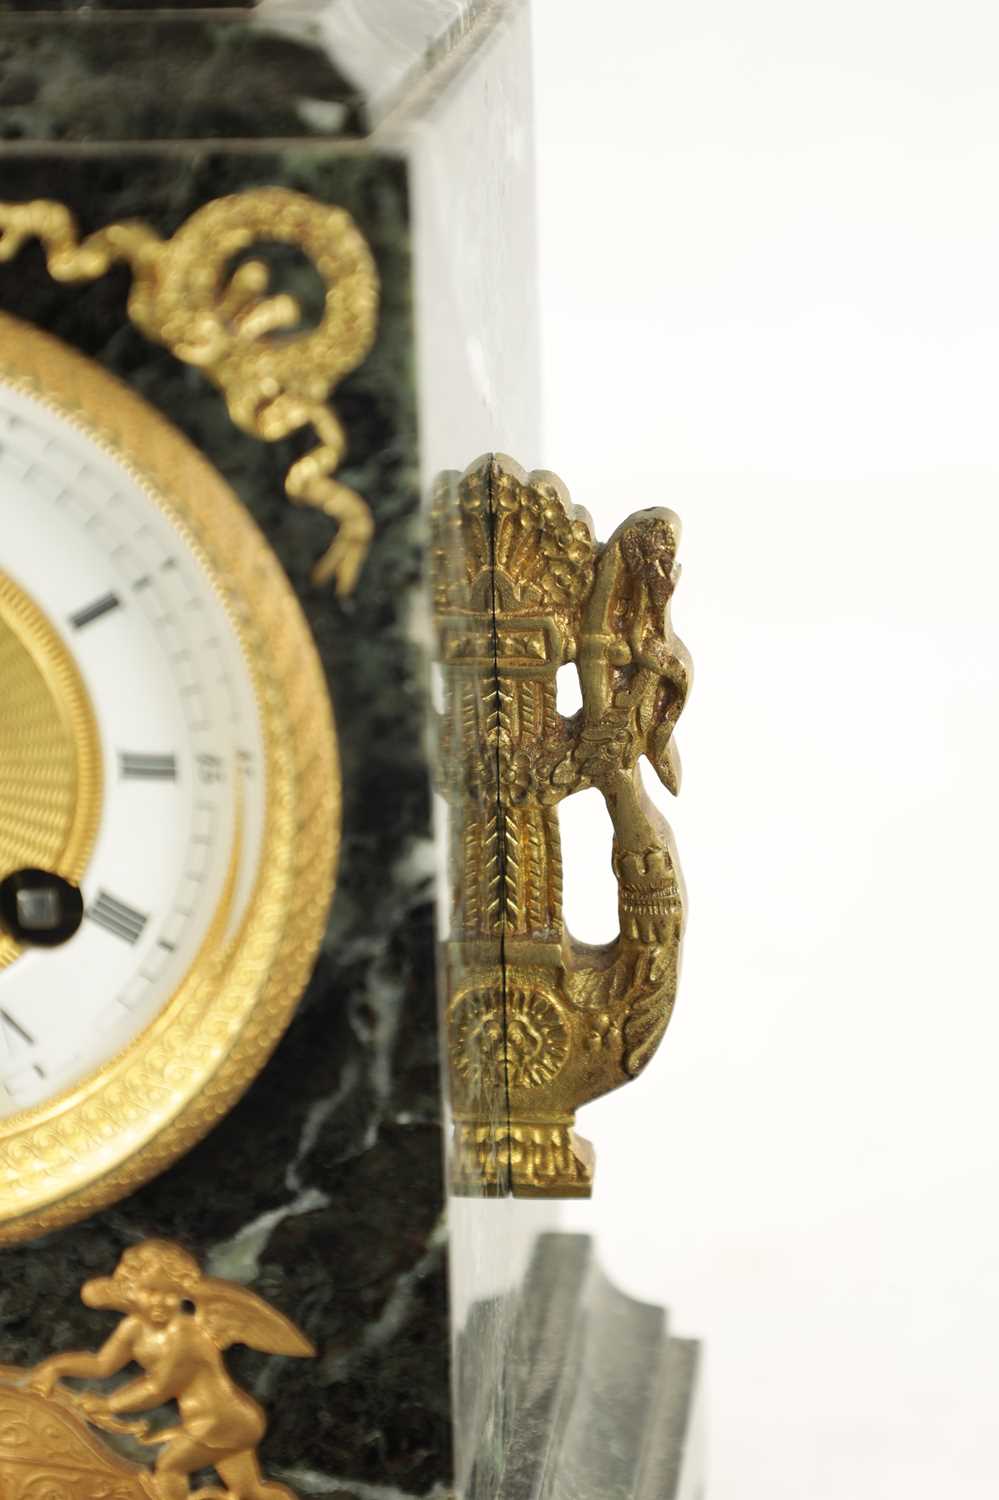 A LATE 19TH CENTURY FRENCH ANTICO VERDE MARBLE, BRONZE AND ORMOLU MANTEL CLOCK - Image 6 of 12